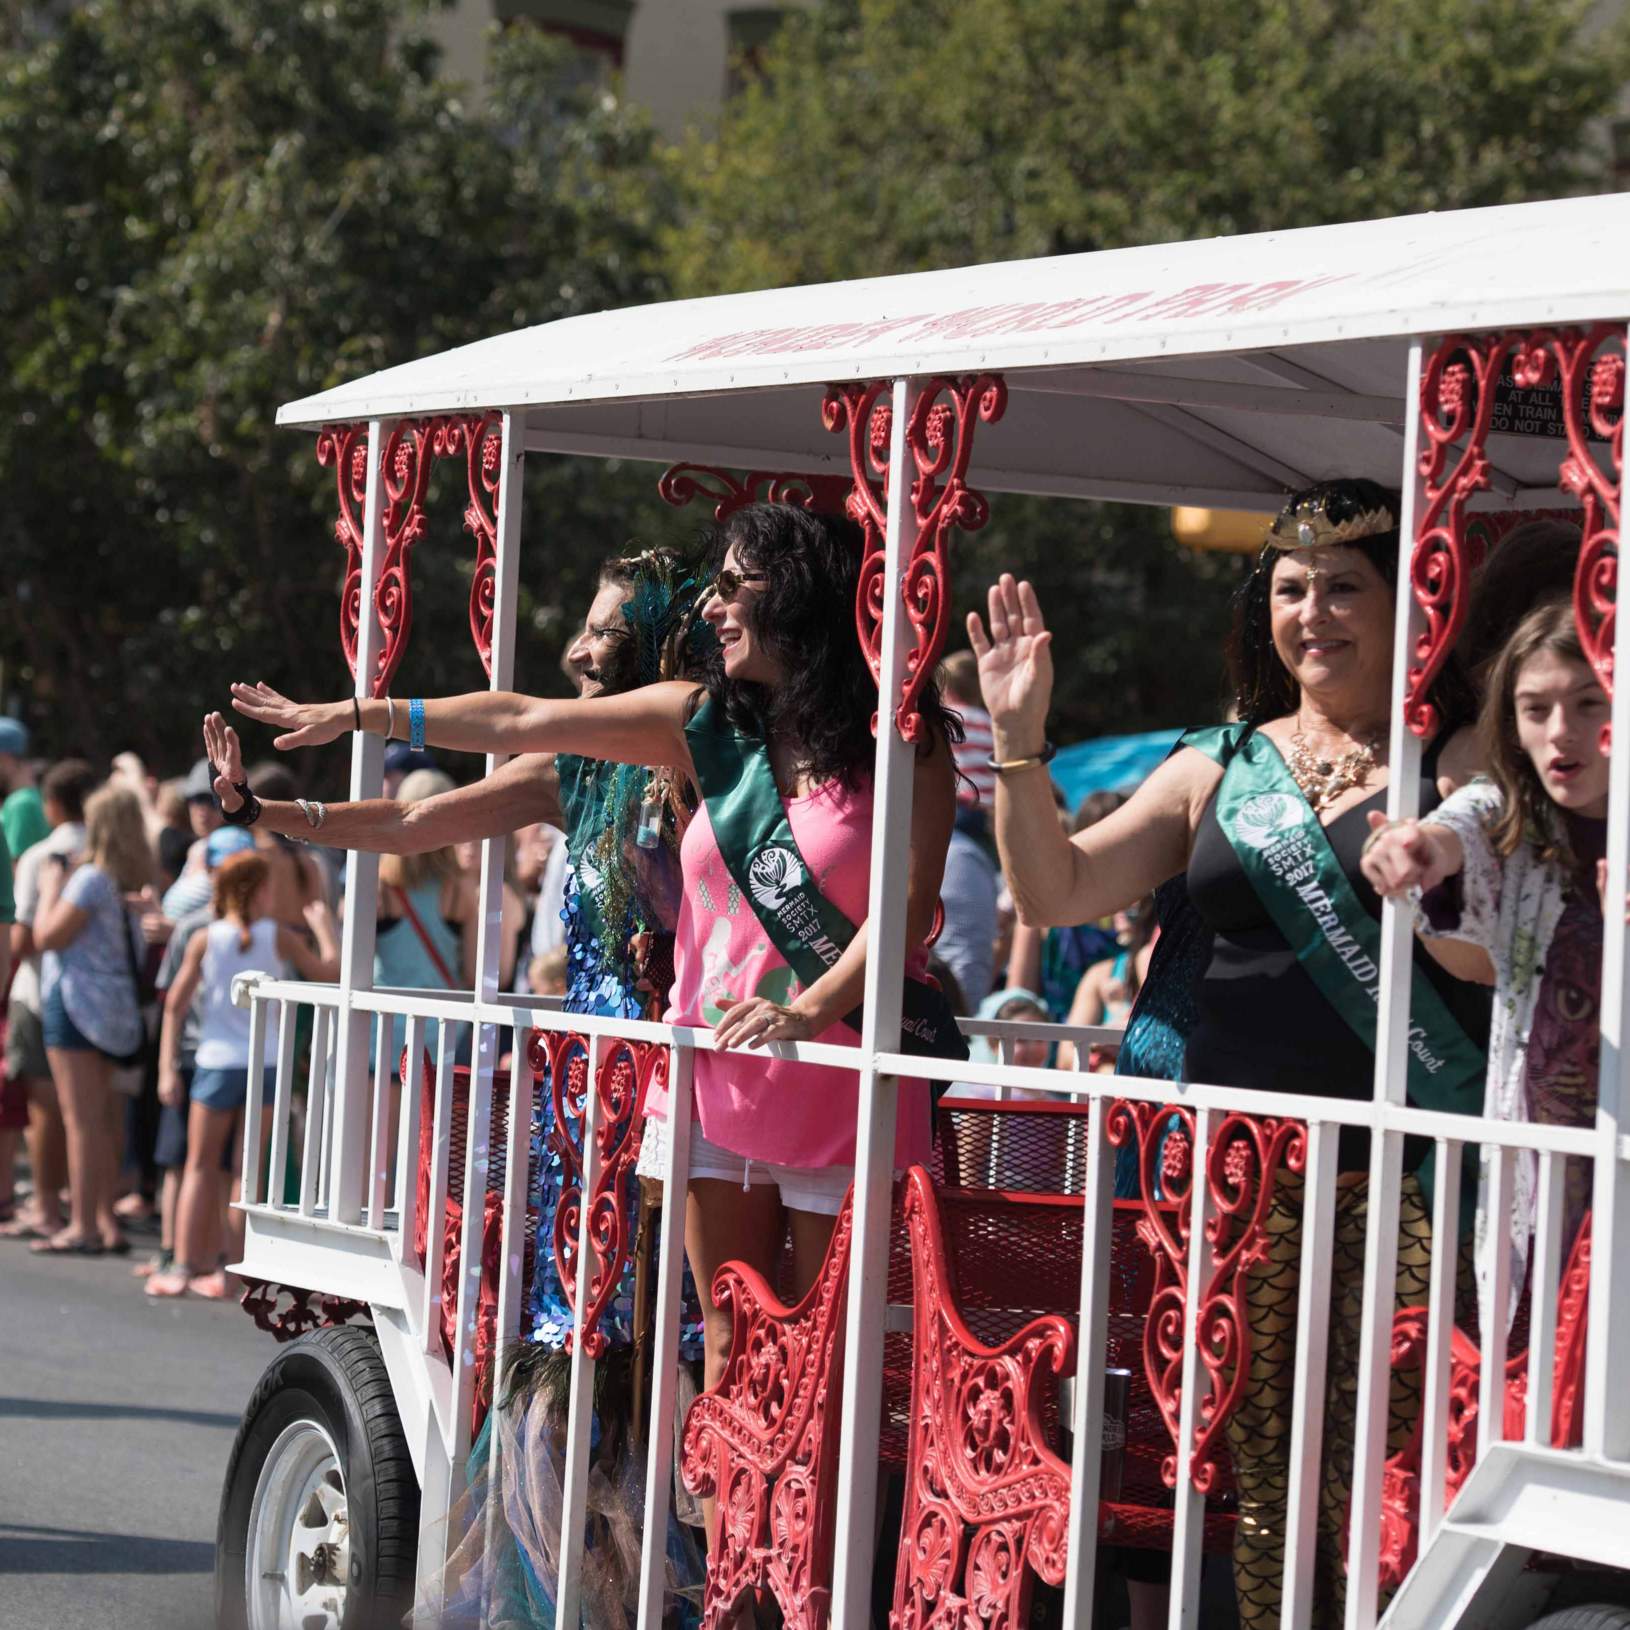 a trolley full of mermaids passes during the mermaid parade